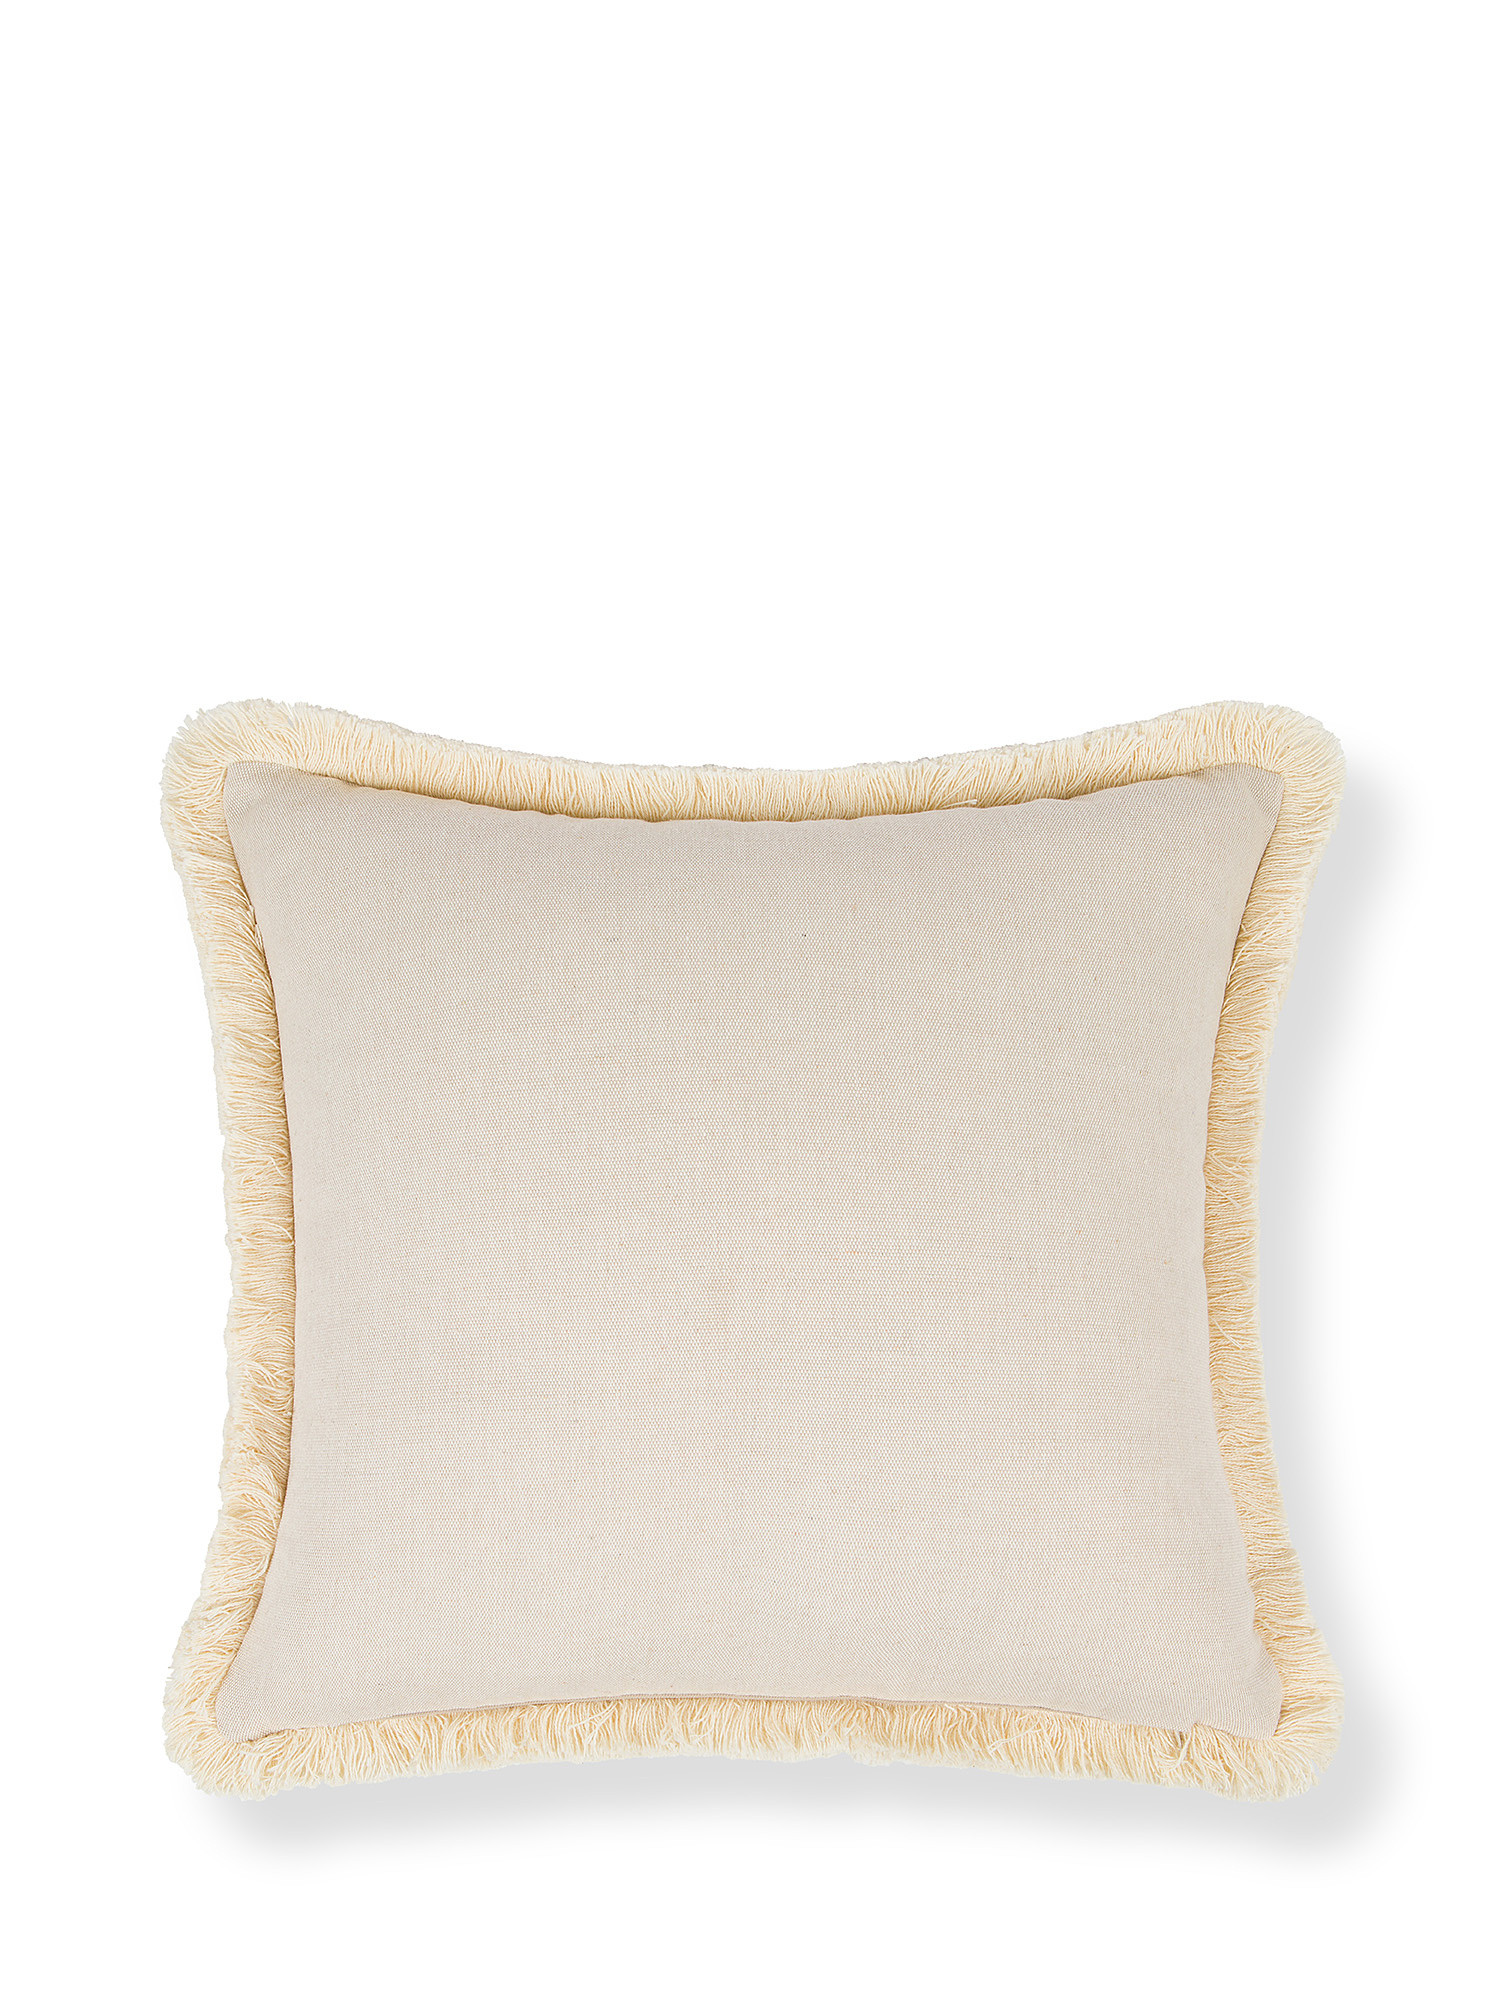 Cushion 45x45 cm striped pattern with fringes, Beige, large image number 1